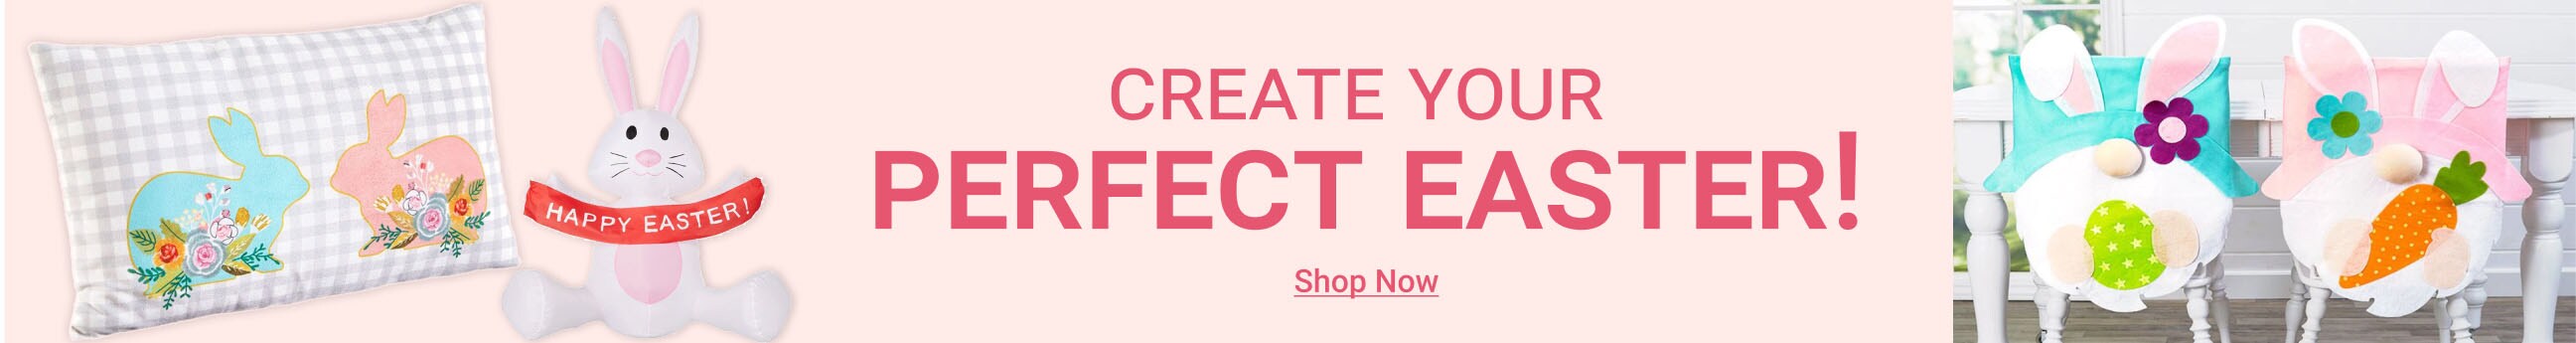 Create Your Perfect Easter! - Shop Now